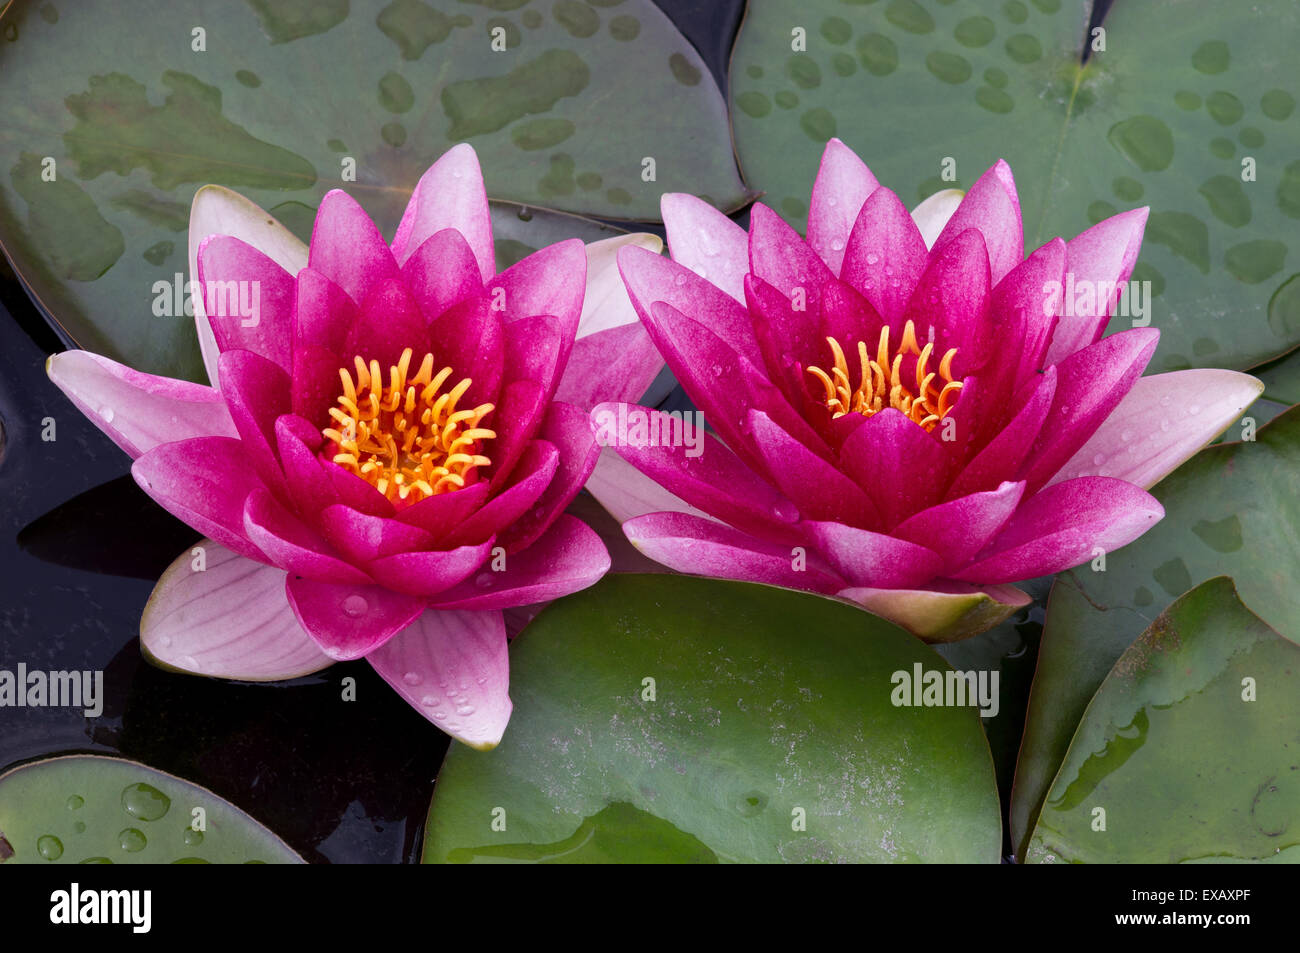 Two red purple pink water lilies with leaves Stock Photo